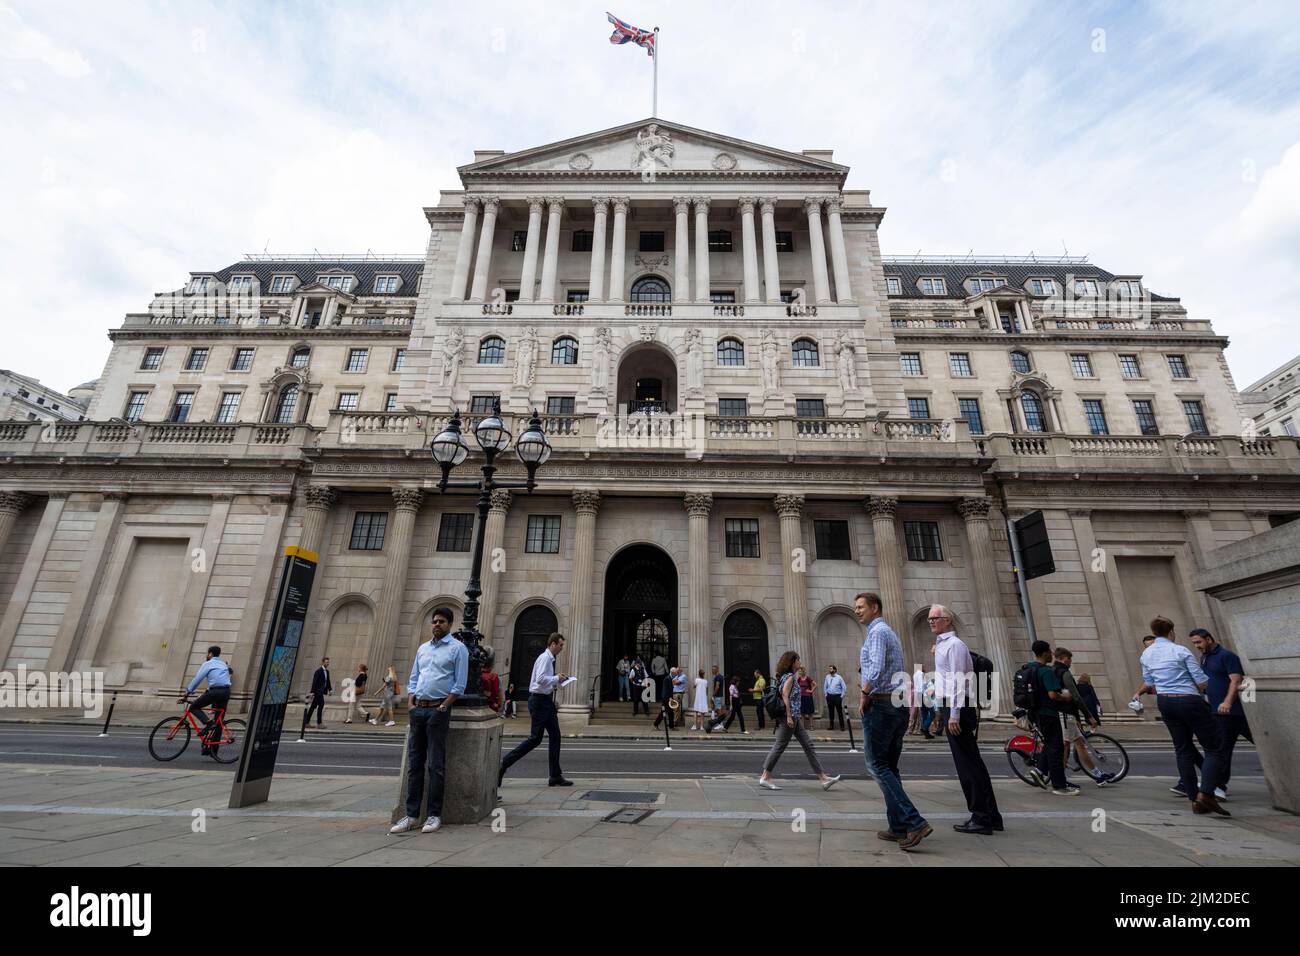 London, UK.  4 August 2022.  The exterior of the Bank of England.  In an attempt to curb inflation, which is predicted to rise to 15% in 2023, the monetary policy committee (MPC) of the Bank of England has announced an increase in the base rate from 1.25% to 1.75%, the biggest rise in 27 years.  A rise is the interest rate will make borrowing more expensive and deter spending.  Credit: Stephen Chung / Alamy Live News Stock Photo